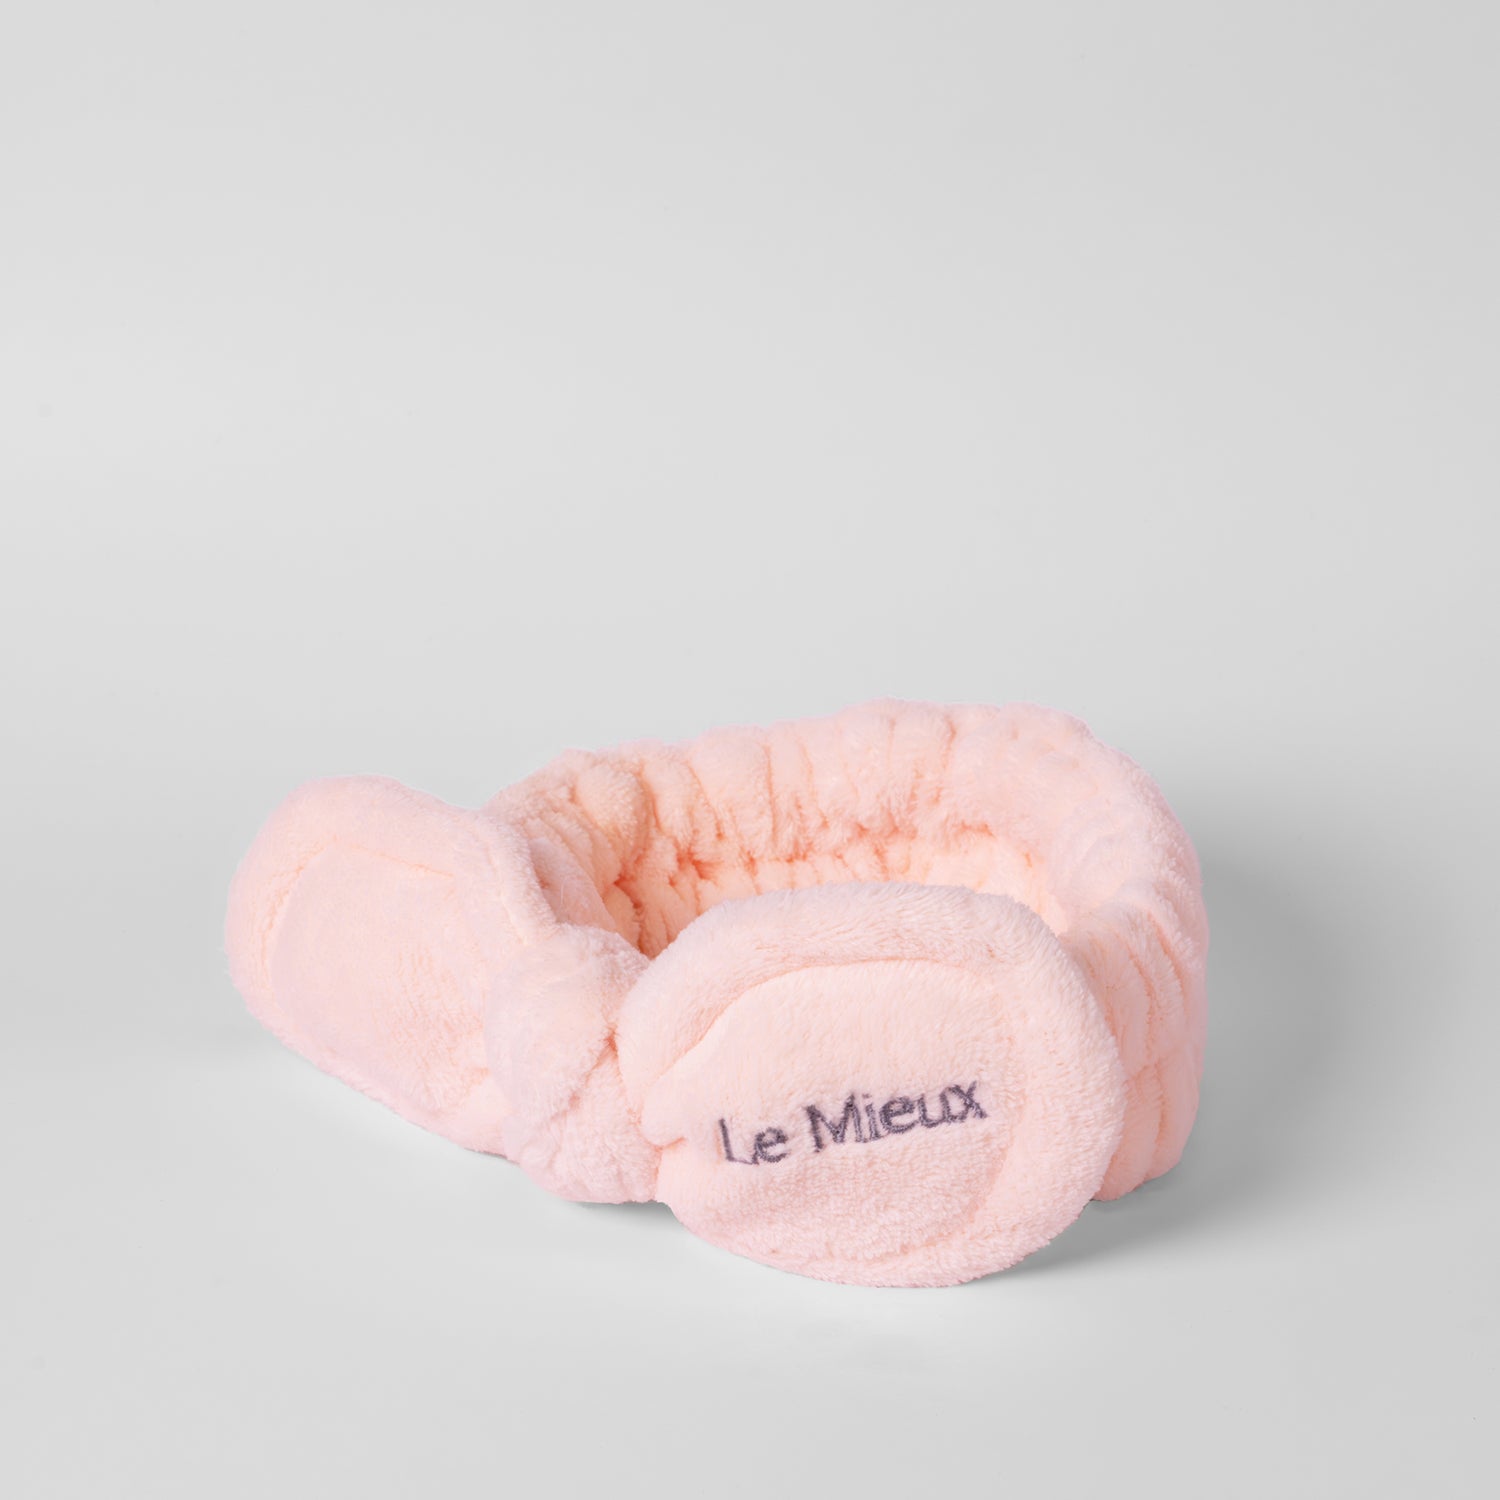  Headband from Le Mieux Skincare - featured